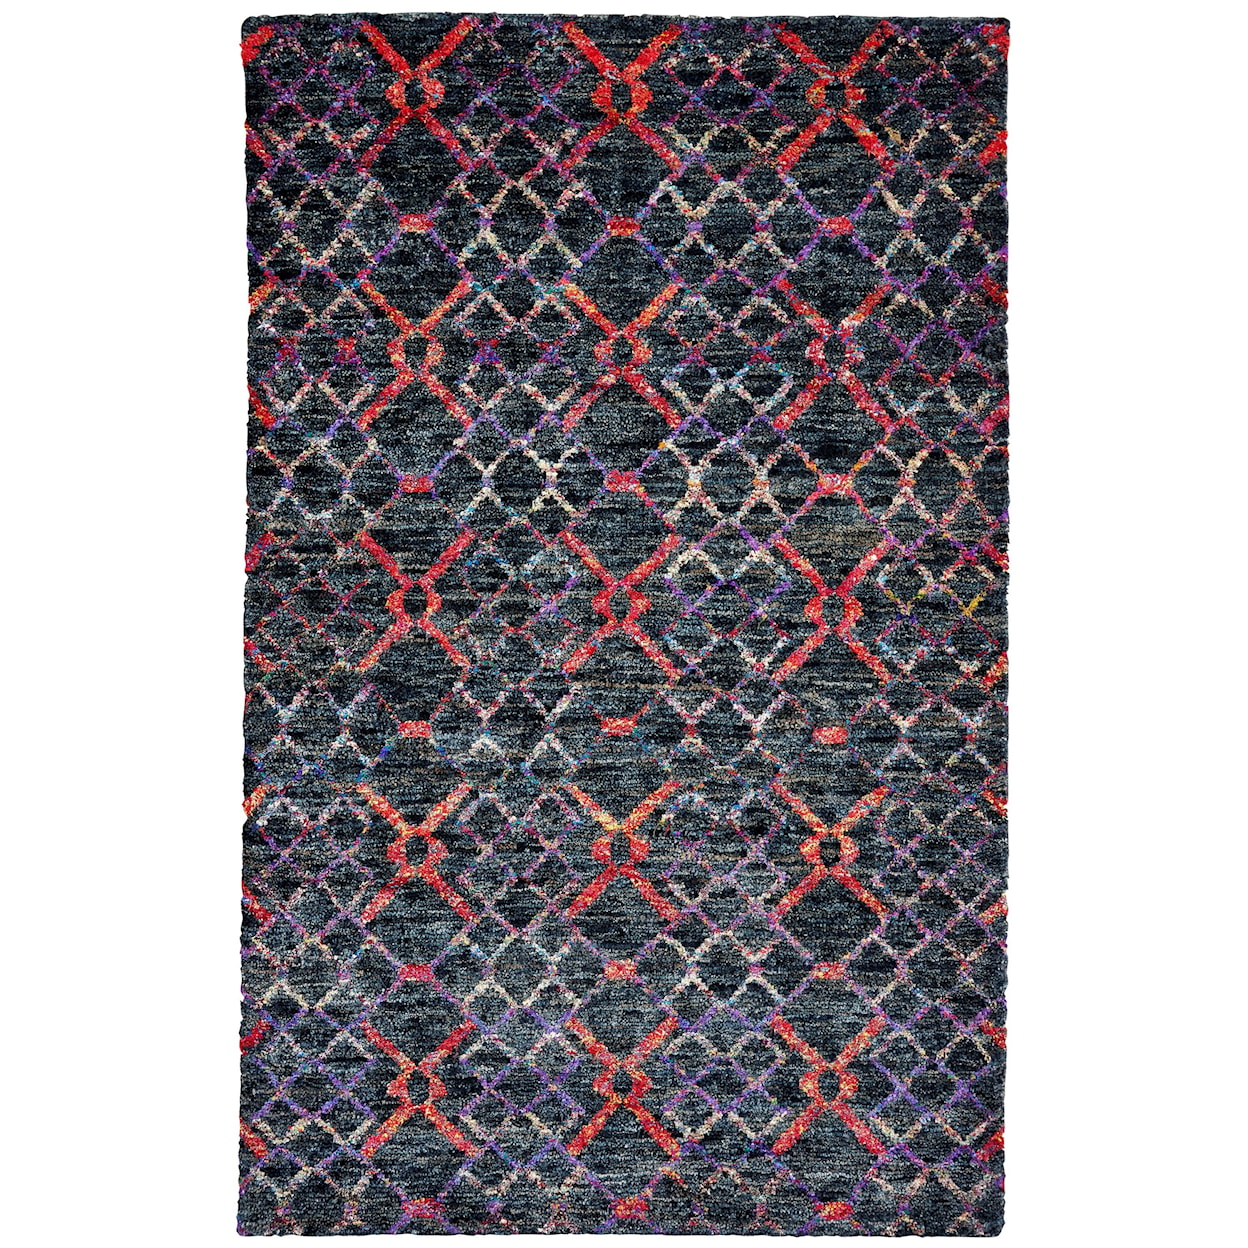 Feizy Rugs Tortola Flame 9'-6" x 13'-6" Area Rug